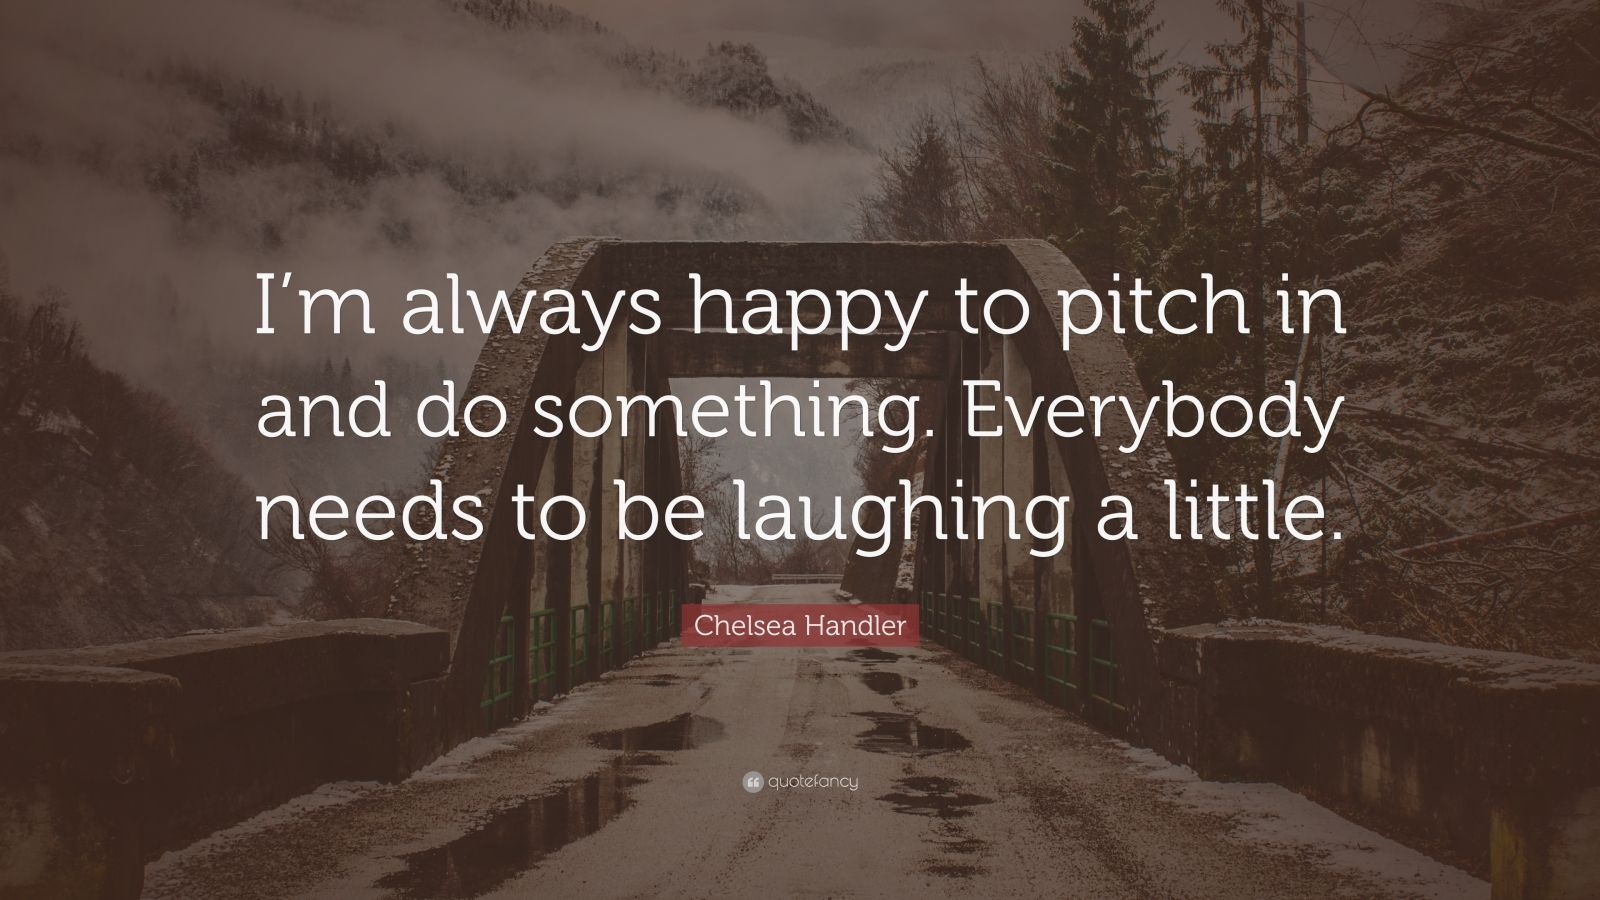 Chelsea Handler Quote: "I'm always happy to pitch in and ...